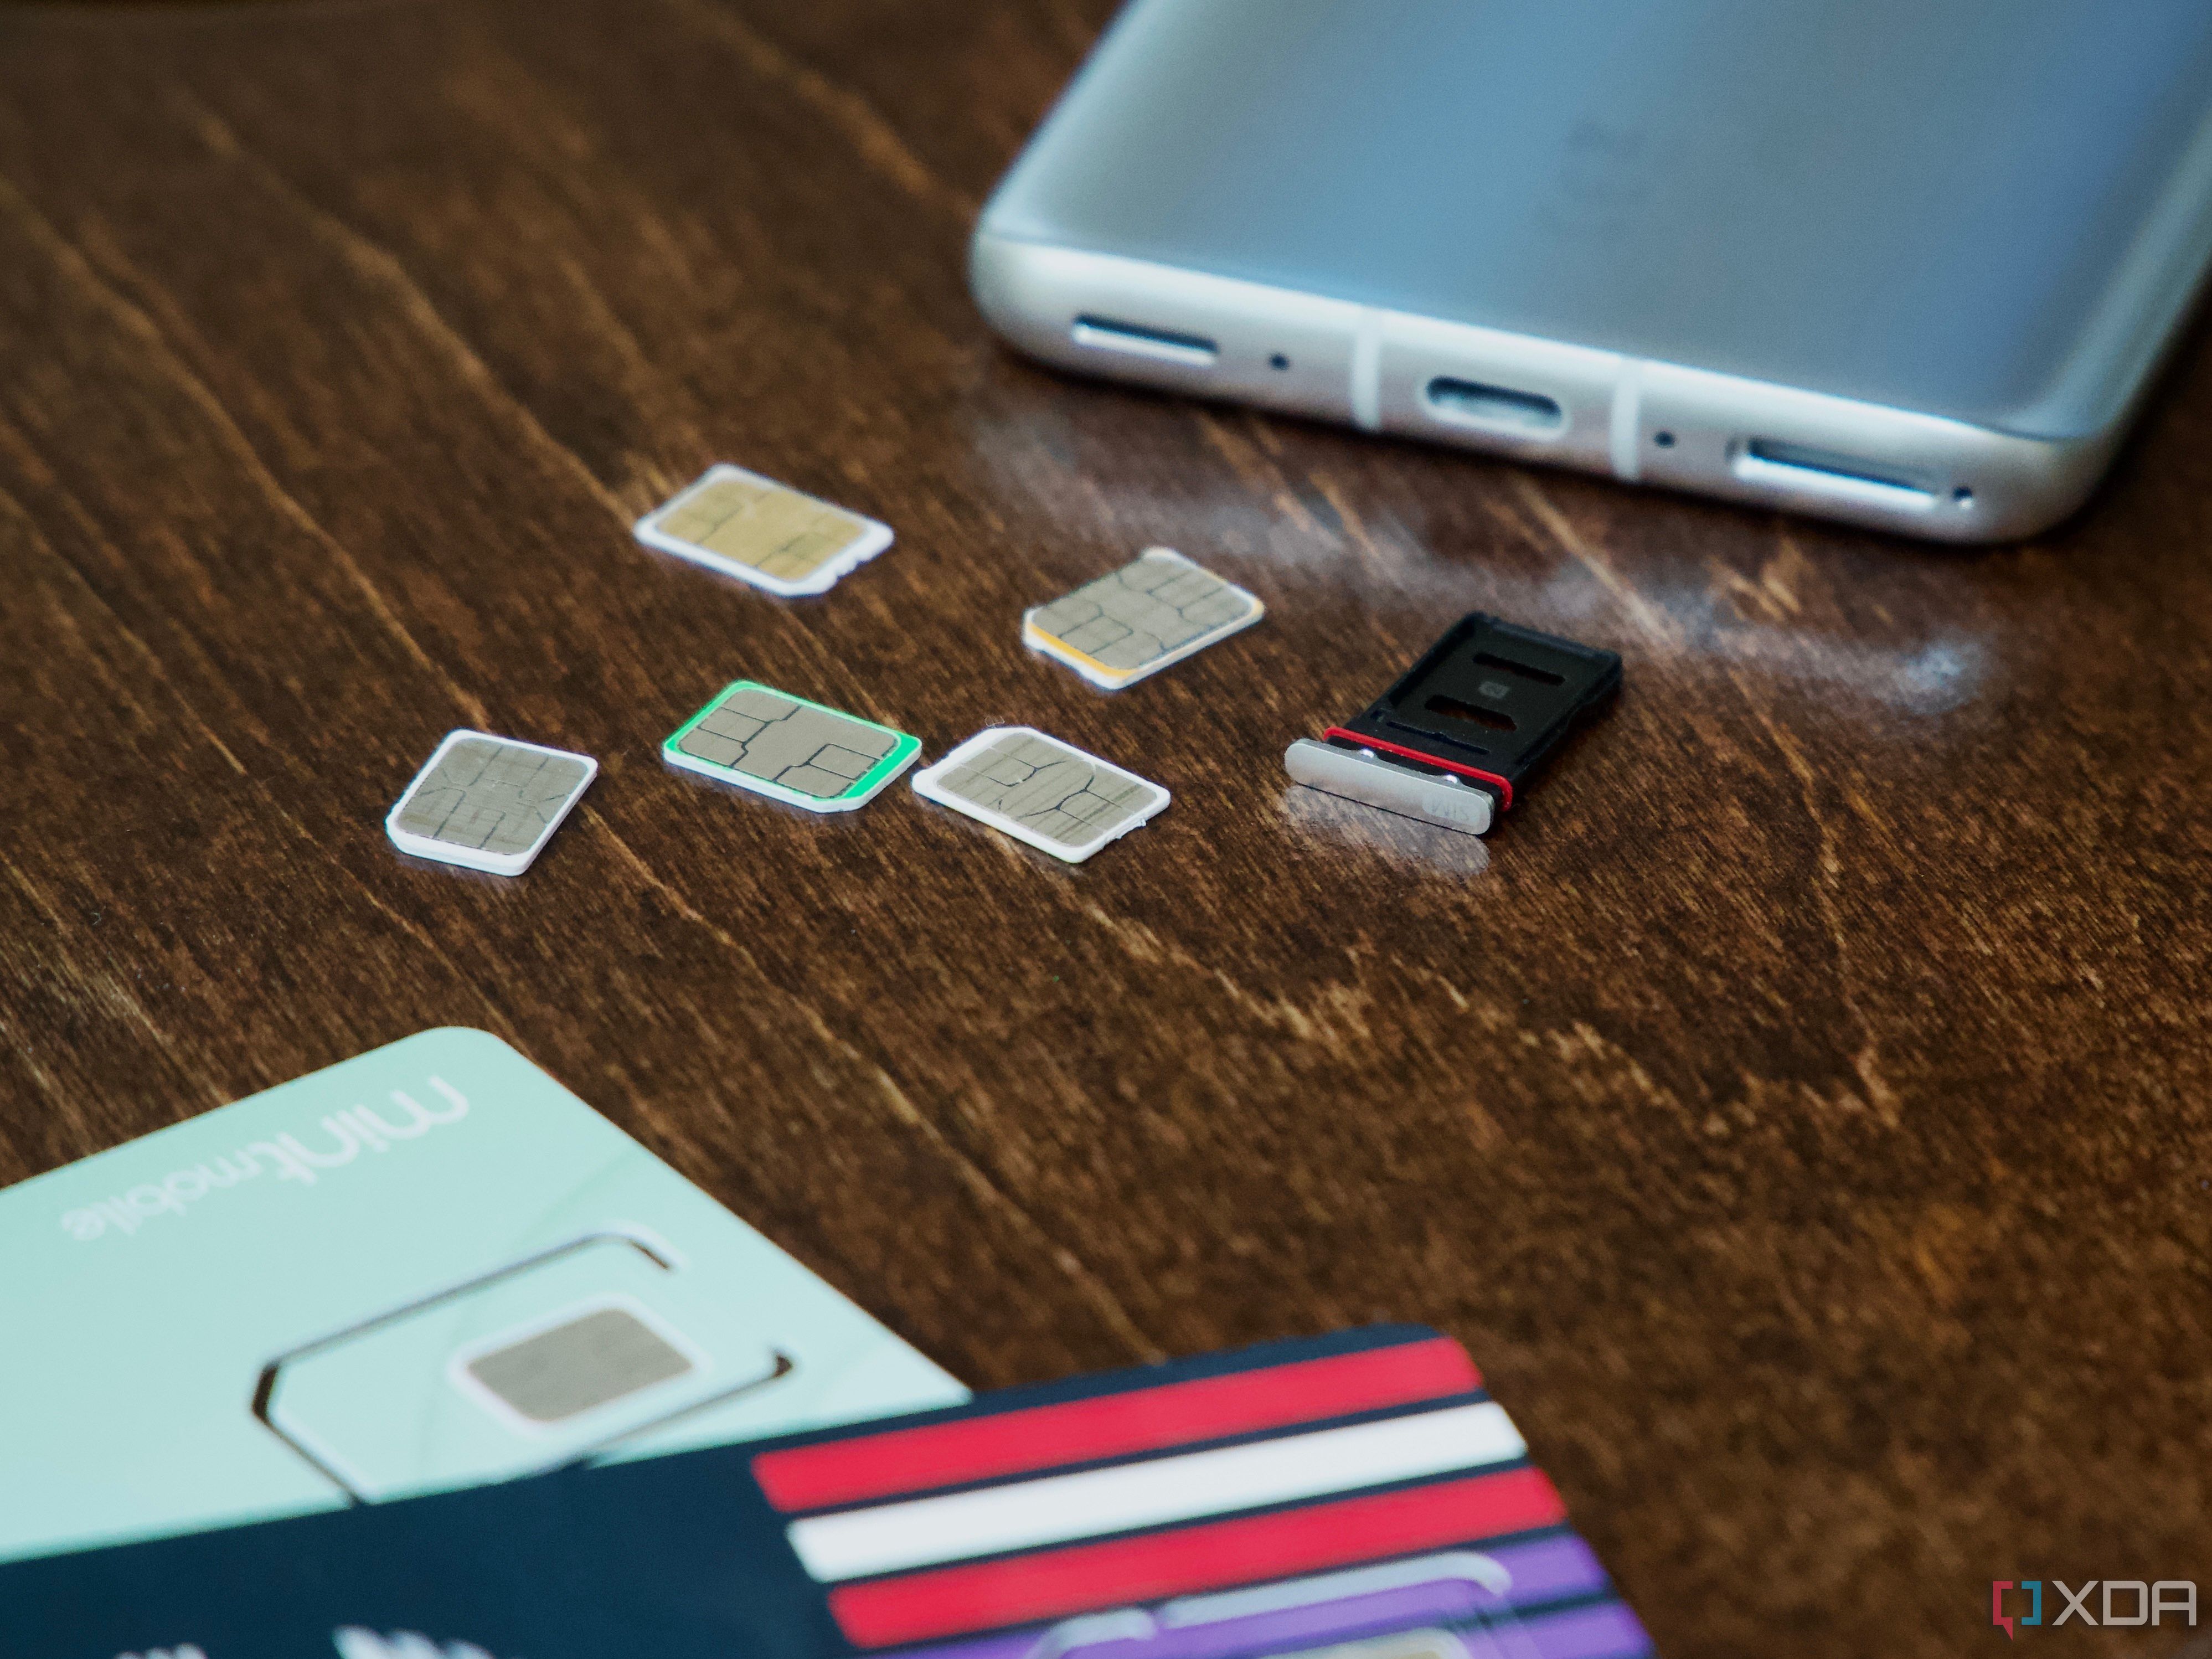 SIM cards and an ejected SIM tray